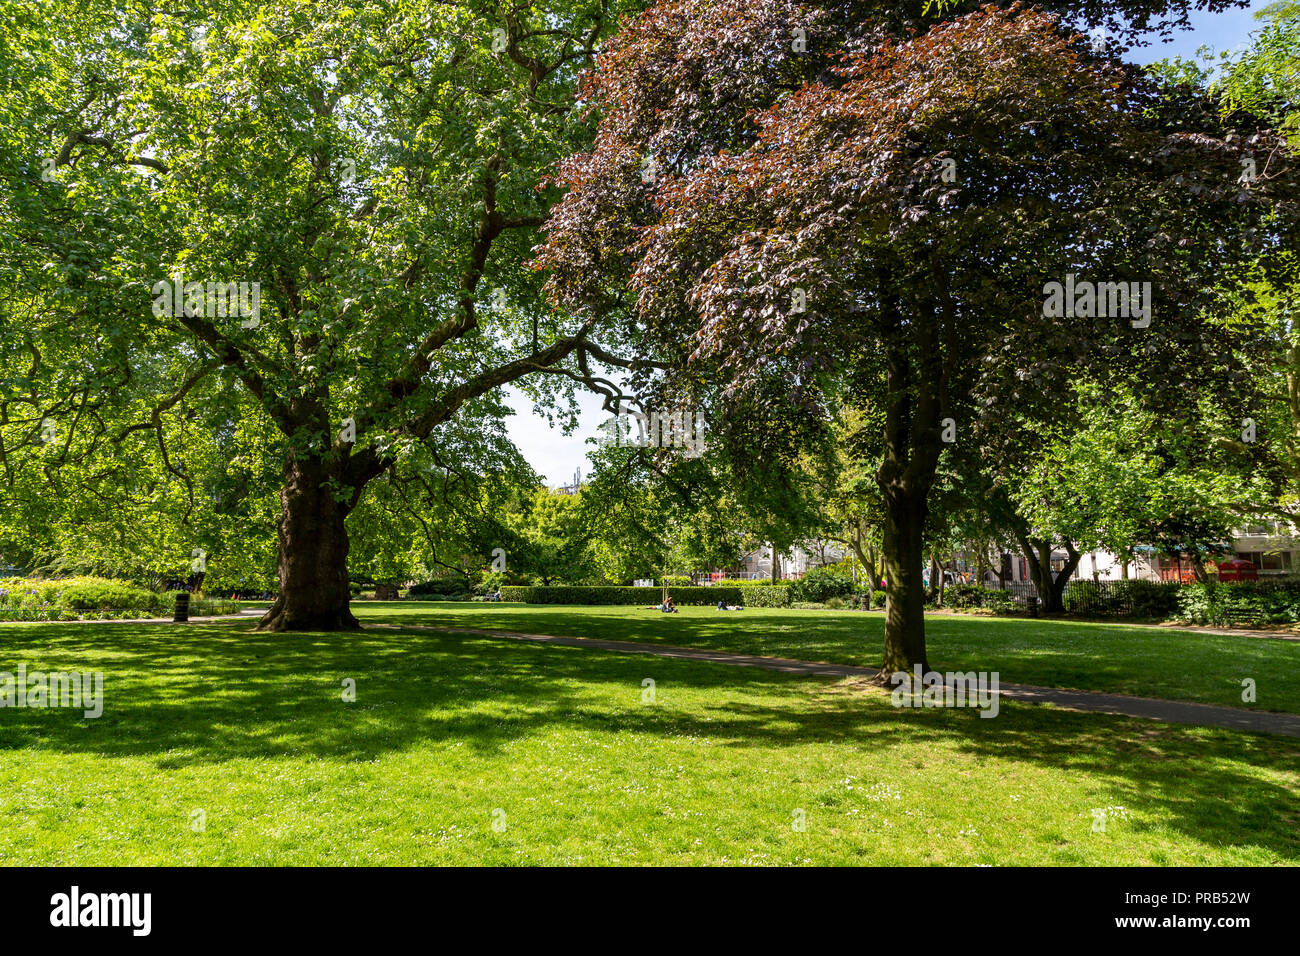 Brunswick Square gardens, a public park in Bloomsbury, central London ...